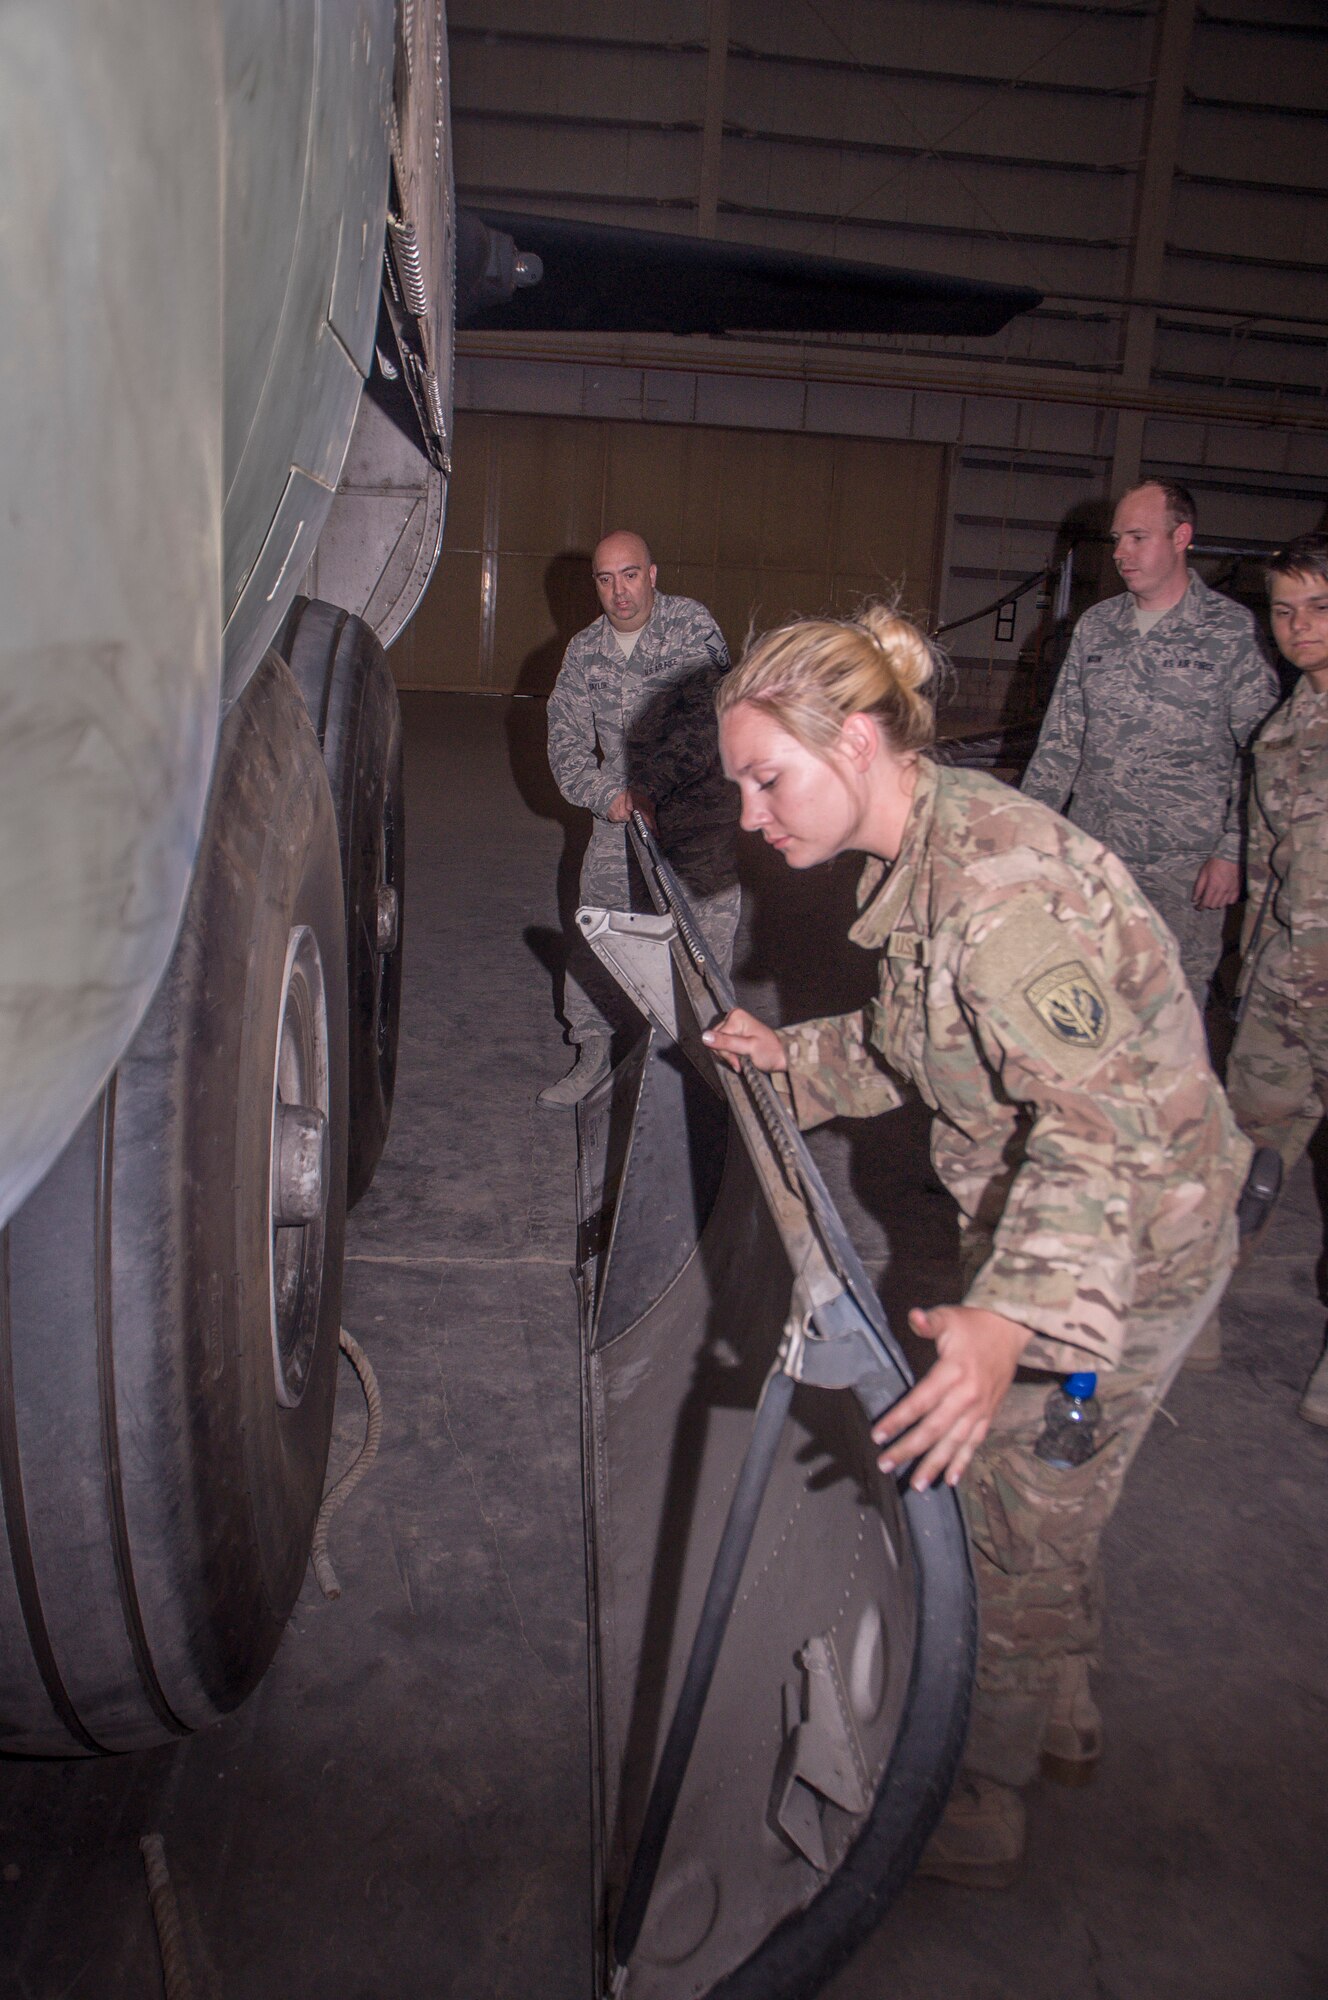 Airman Kiley Foulke, a 386th Expeditionary Maintenance Squadron combat metals team member, inspects the edge of a recently repaired C-130 landing gear door during an installation operation at an undisclosed location in Southwest Asia, June 23, 2017.  (U.S. Air Force photo by Master Sgt. Eric M. Sharman)